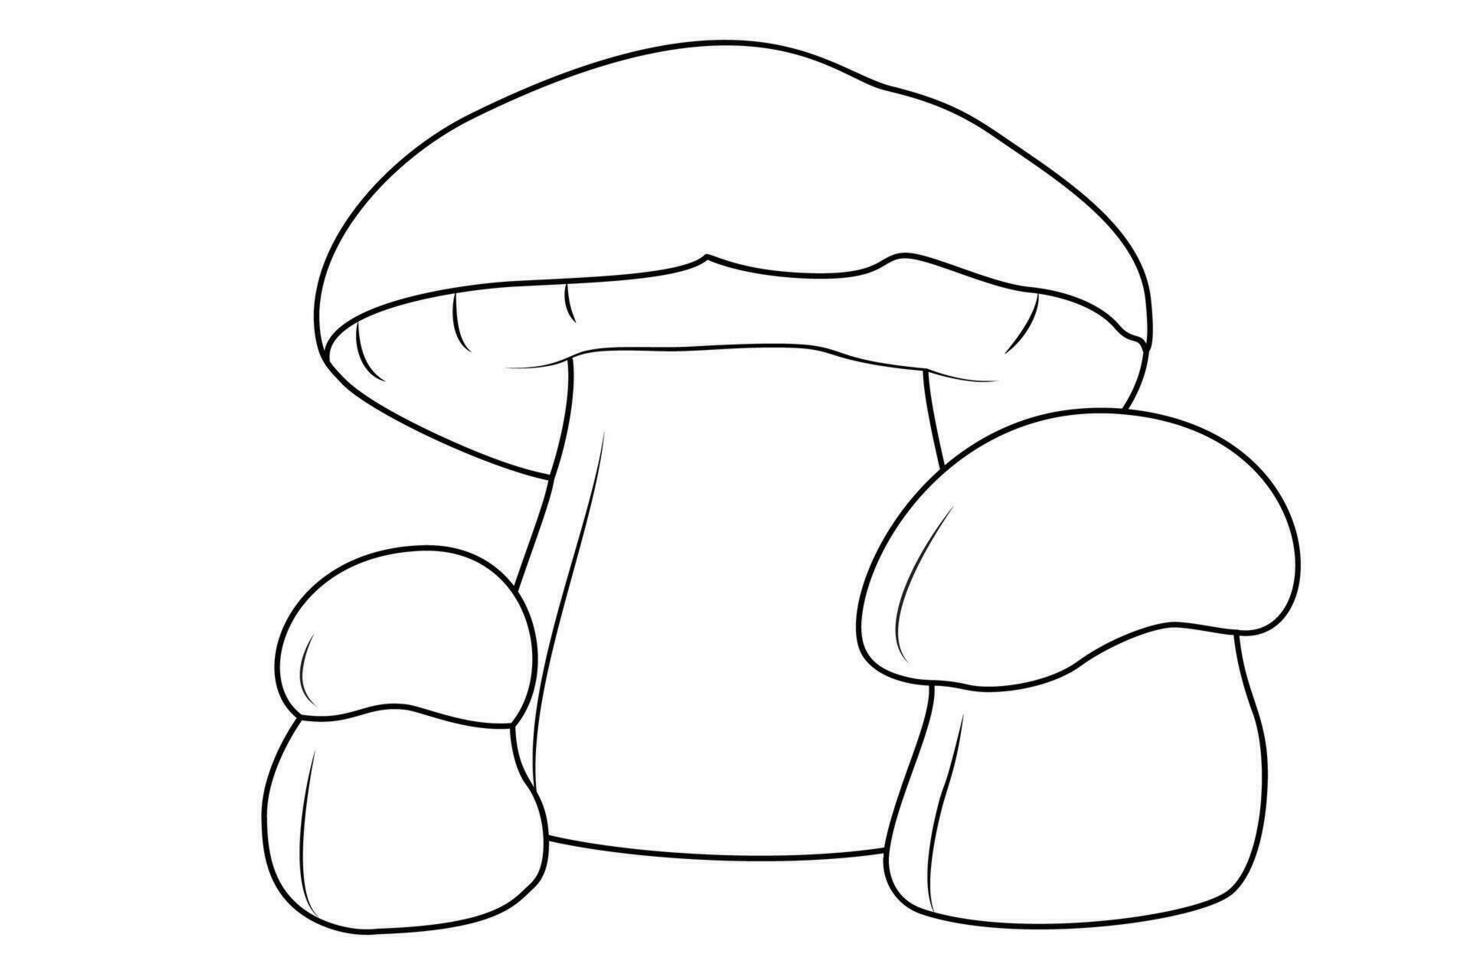 Mushrooms. Bolete, Black and white isolated. Vintage. Coloring page vector